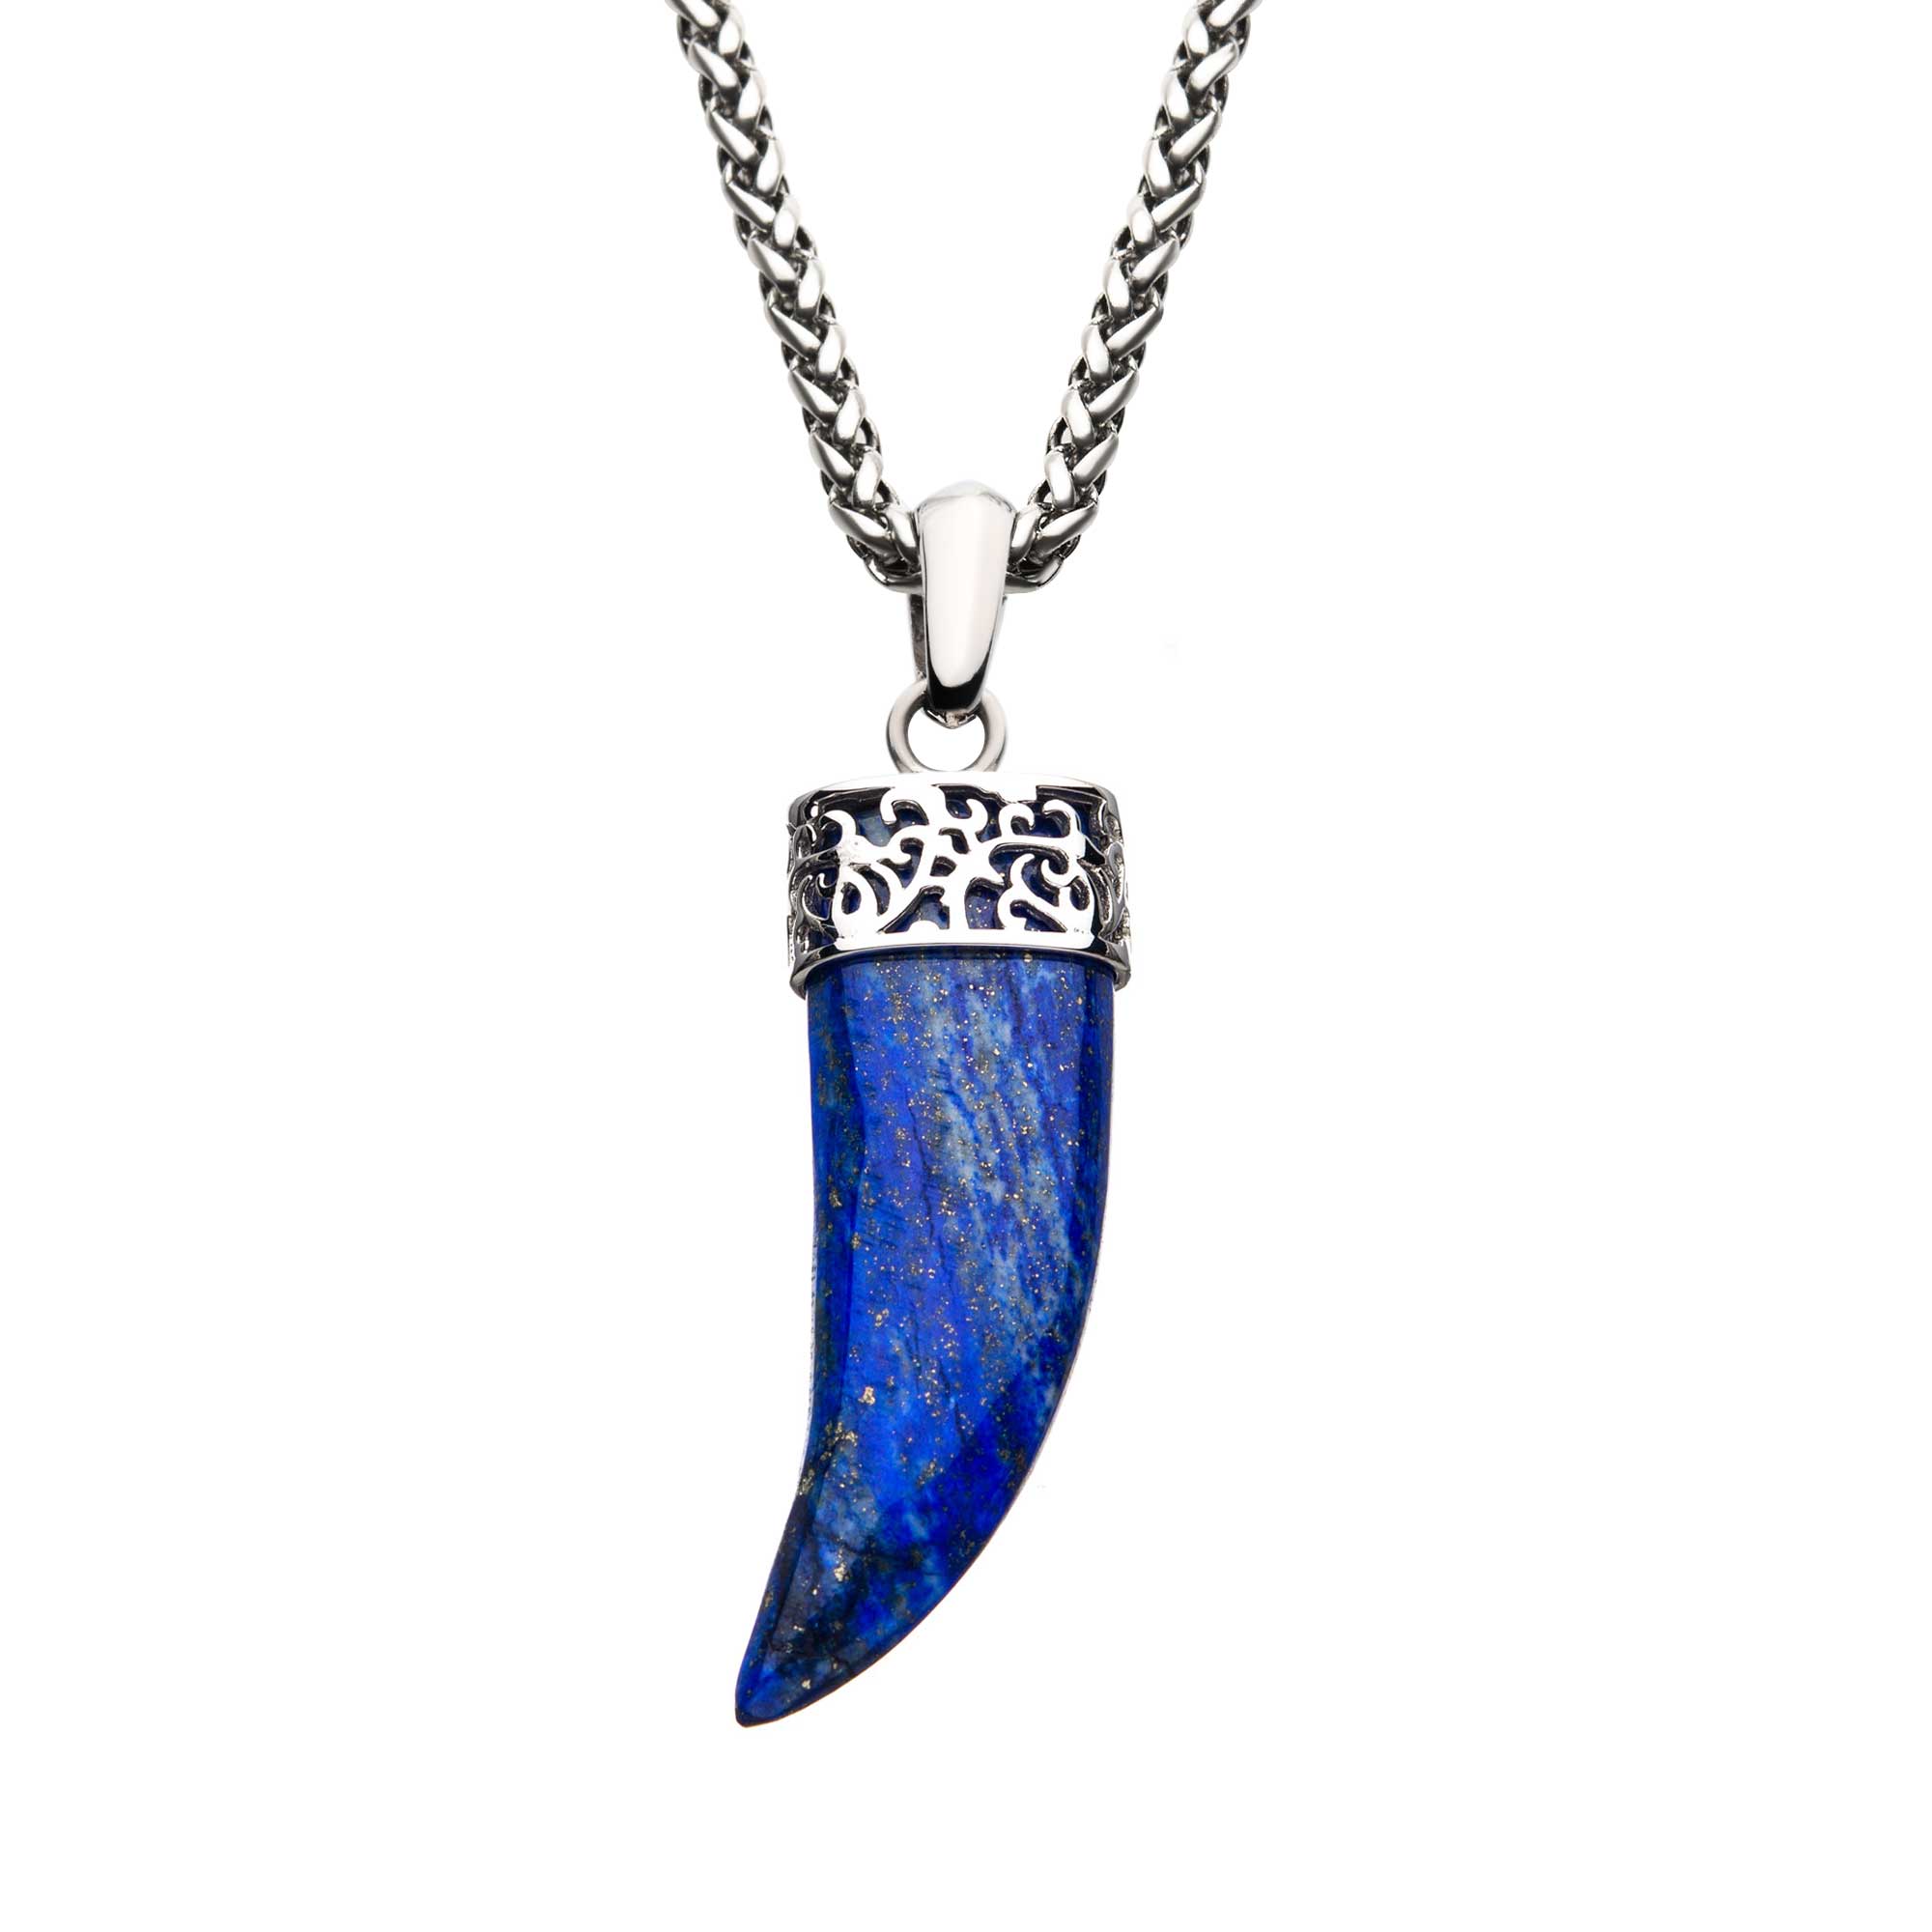 Stainless Steel with Lapis Lazuli Stone Horn Pendant, with Steel Wheat Chain P.K. Bennett Jewelers Mundelein, IL